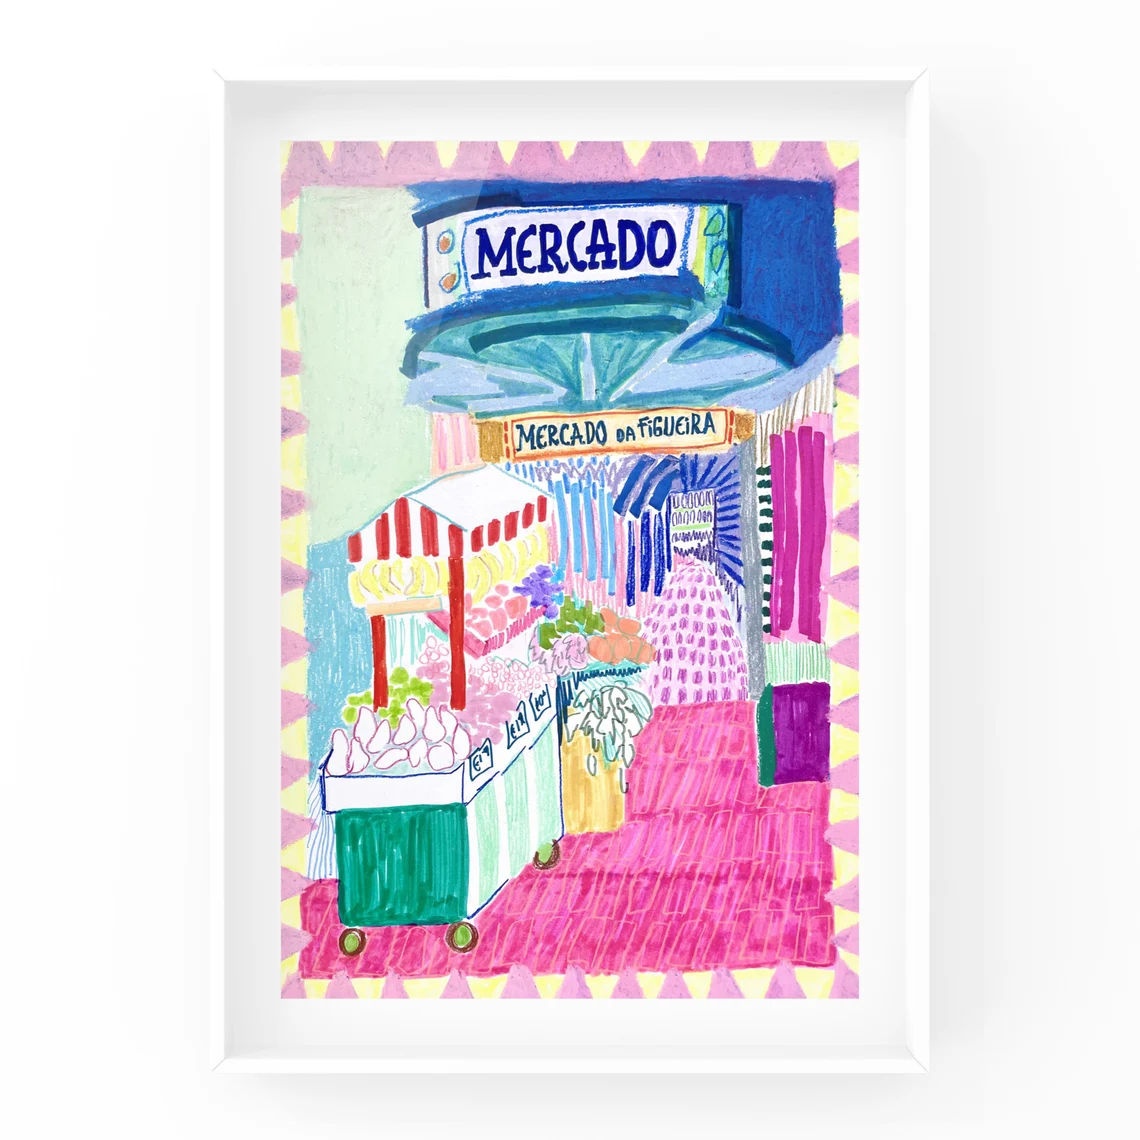 One-of-a-kind fruit market pen illustration in Portugal | Unique colorful wall art | Lisbon travel wall art